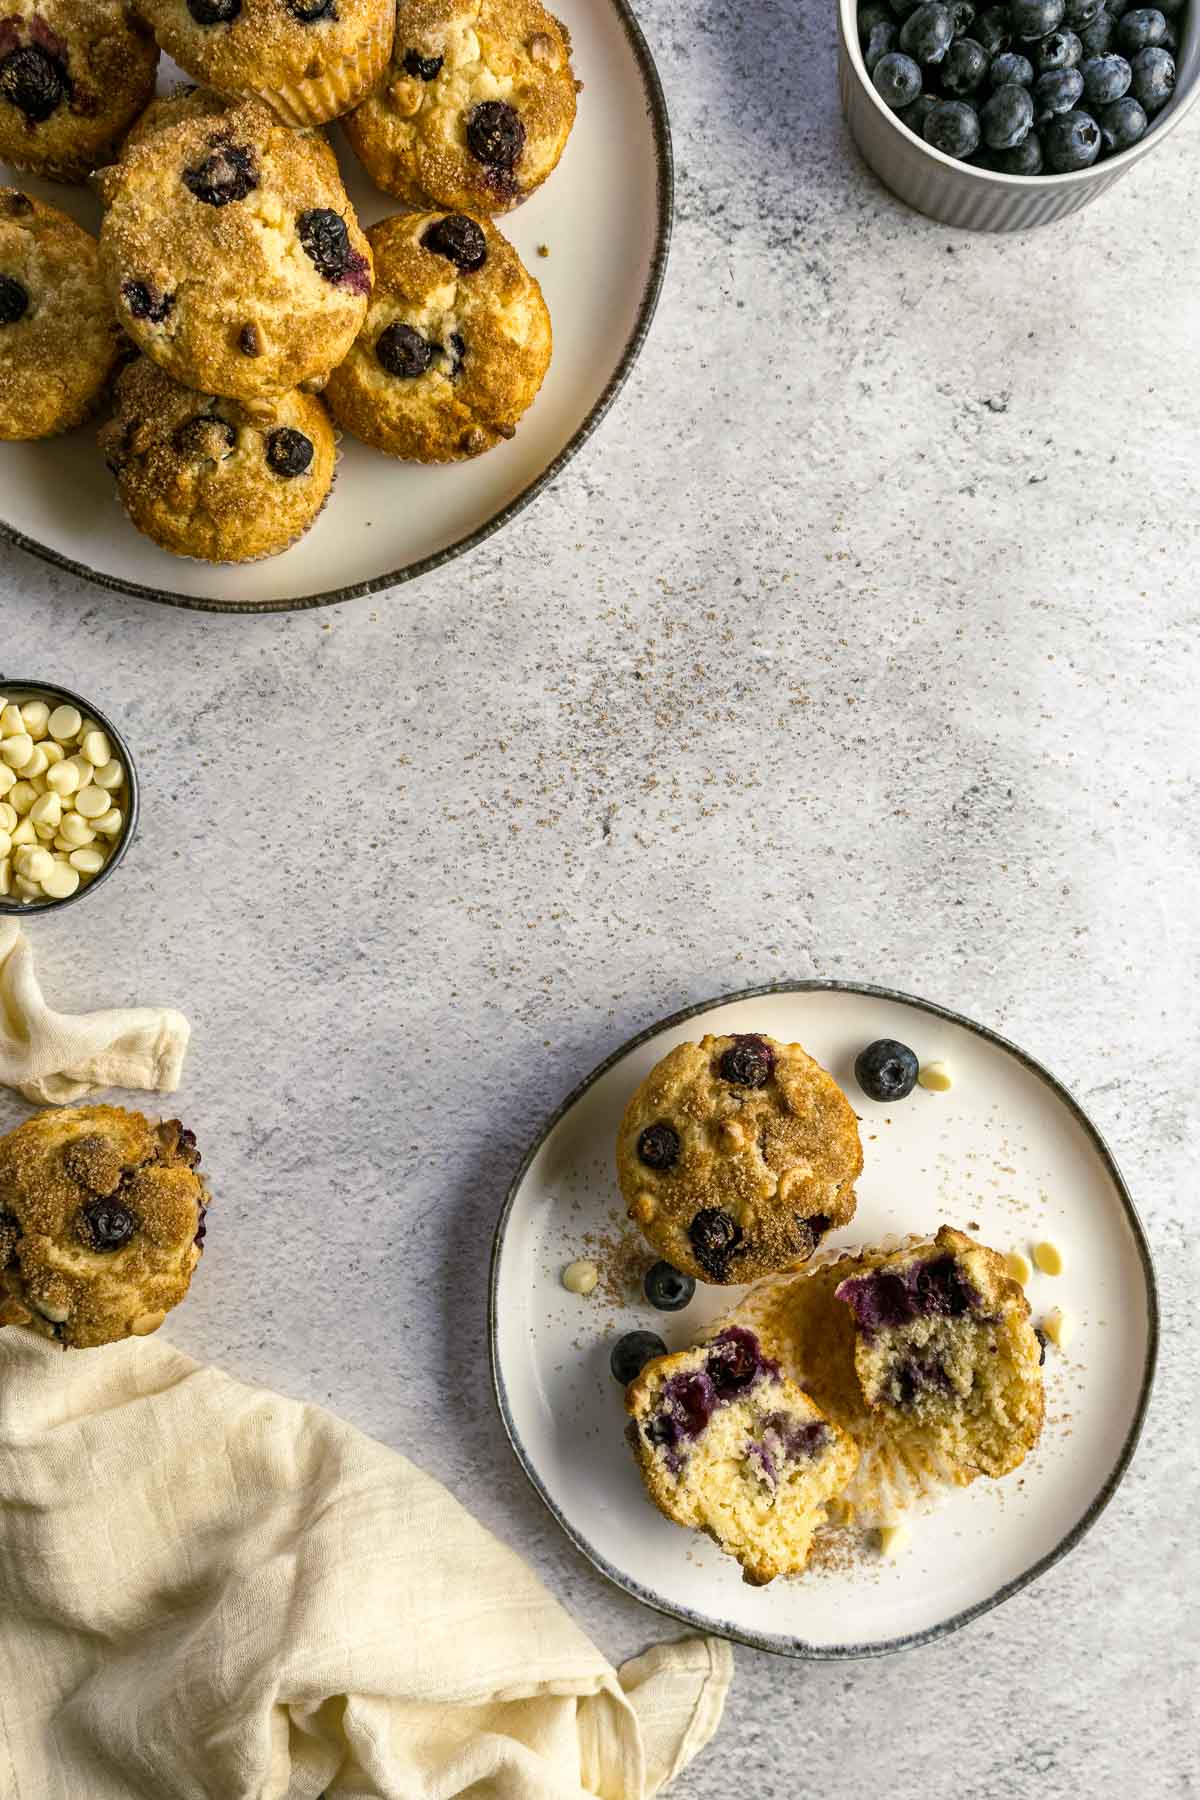 Blueberry muffin split in two on a plate with an extra muffin next to a plate of muffins